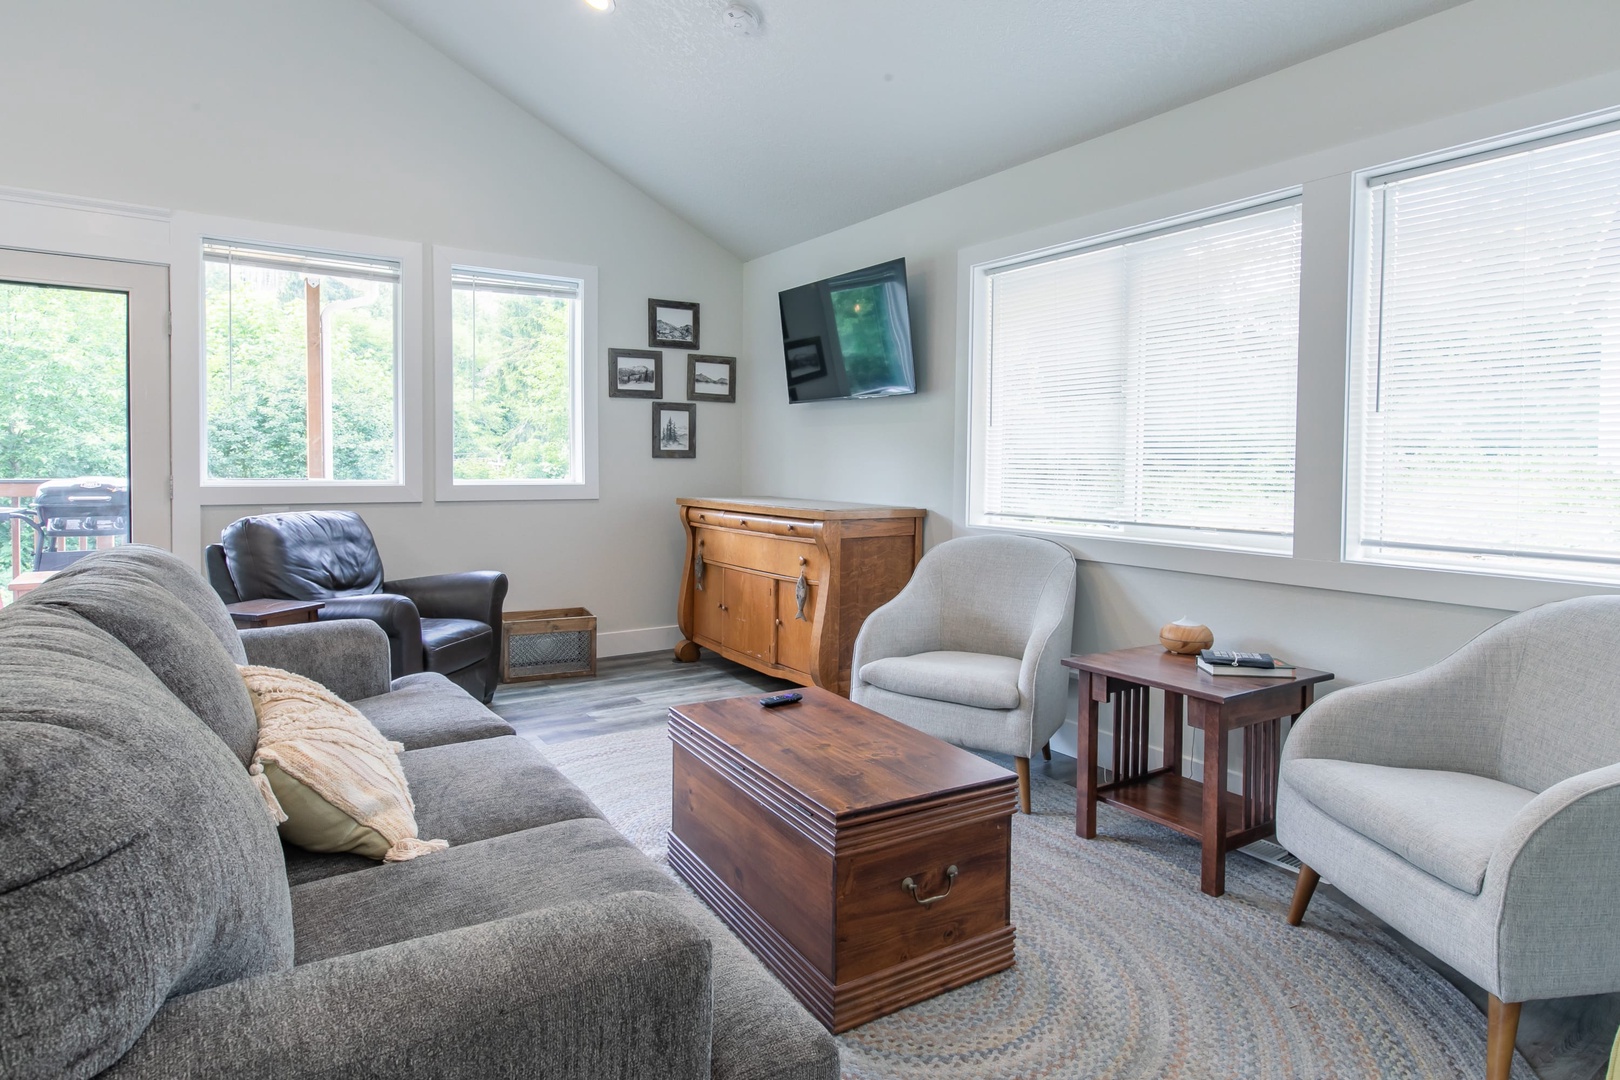 Nehalem Vacation Rentals, Nehalem Coastal Oasis - The Living room couch turns into a pull out bed to host extra guests